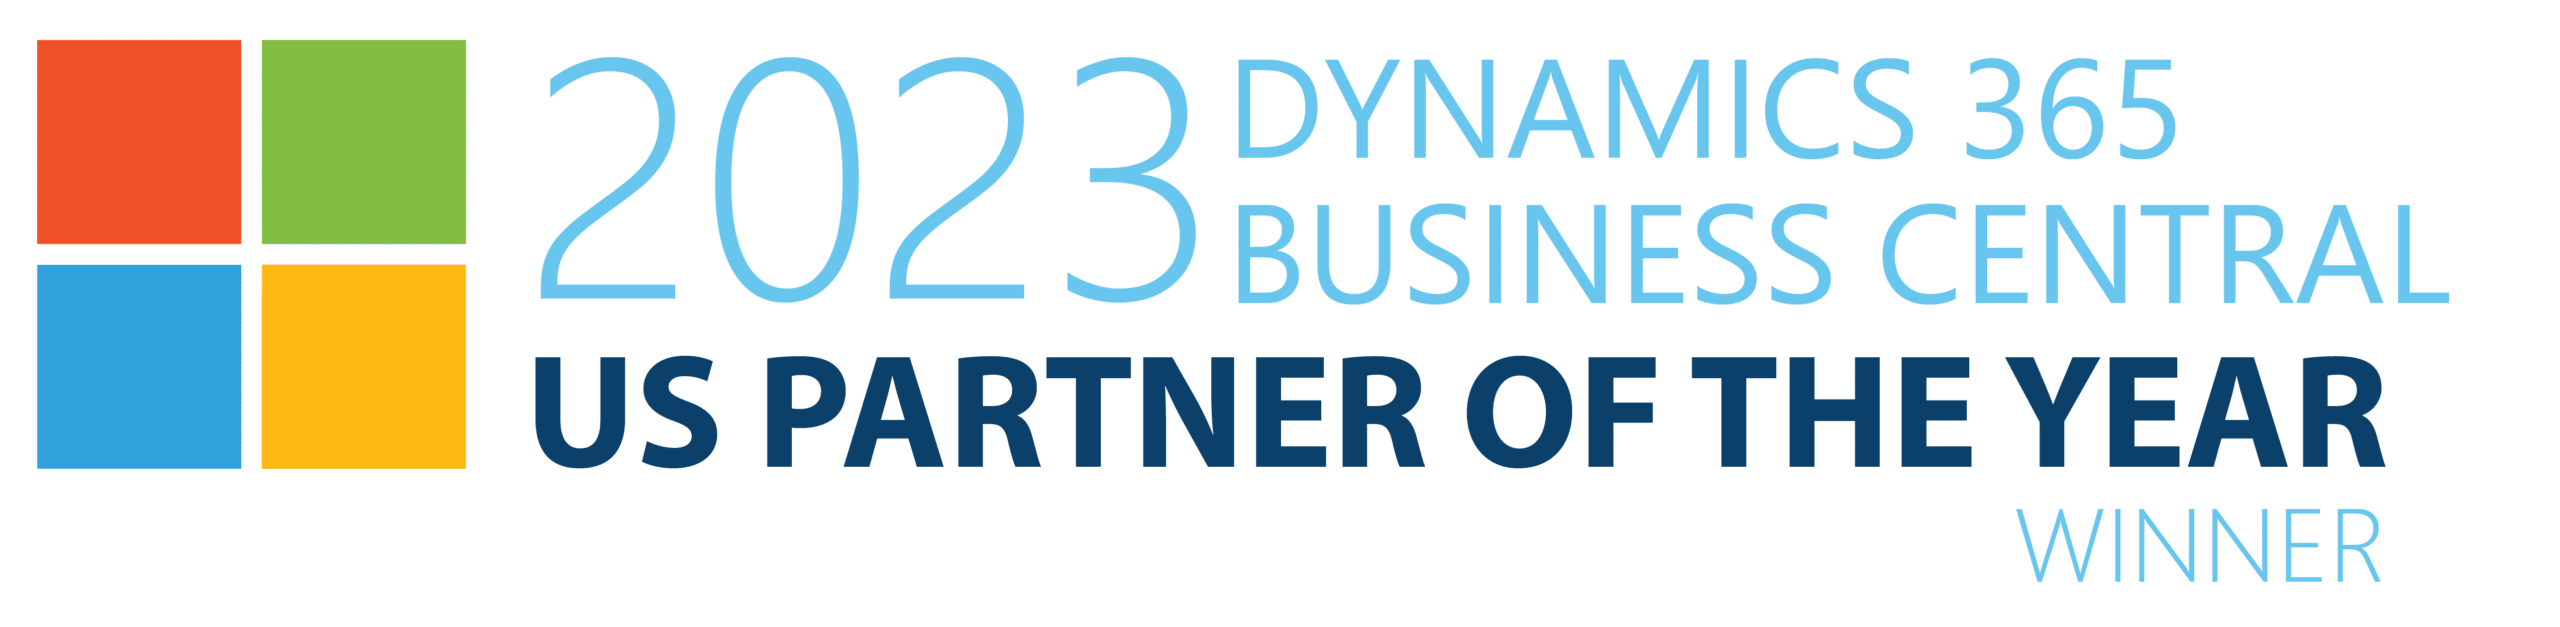 2023 Microsoft Dynamics 365 Business Central US Partner of the Year Winner